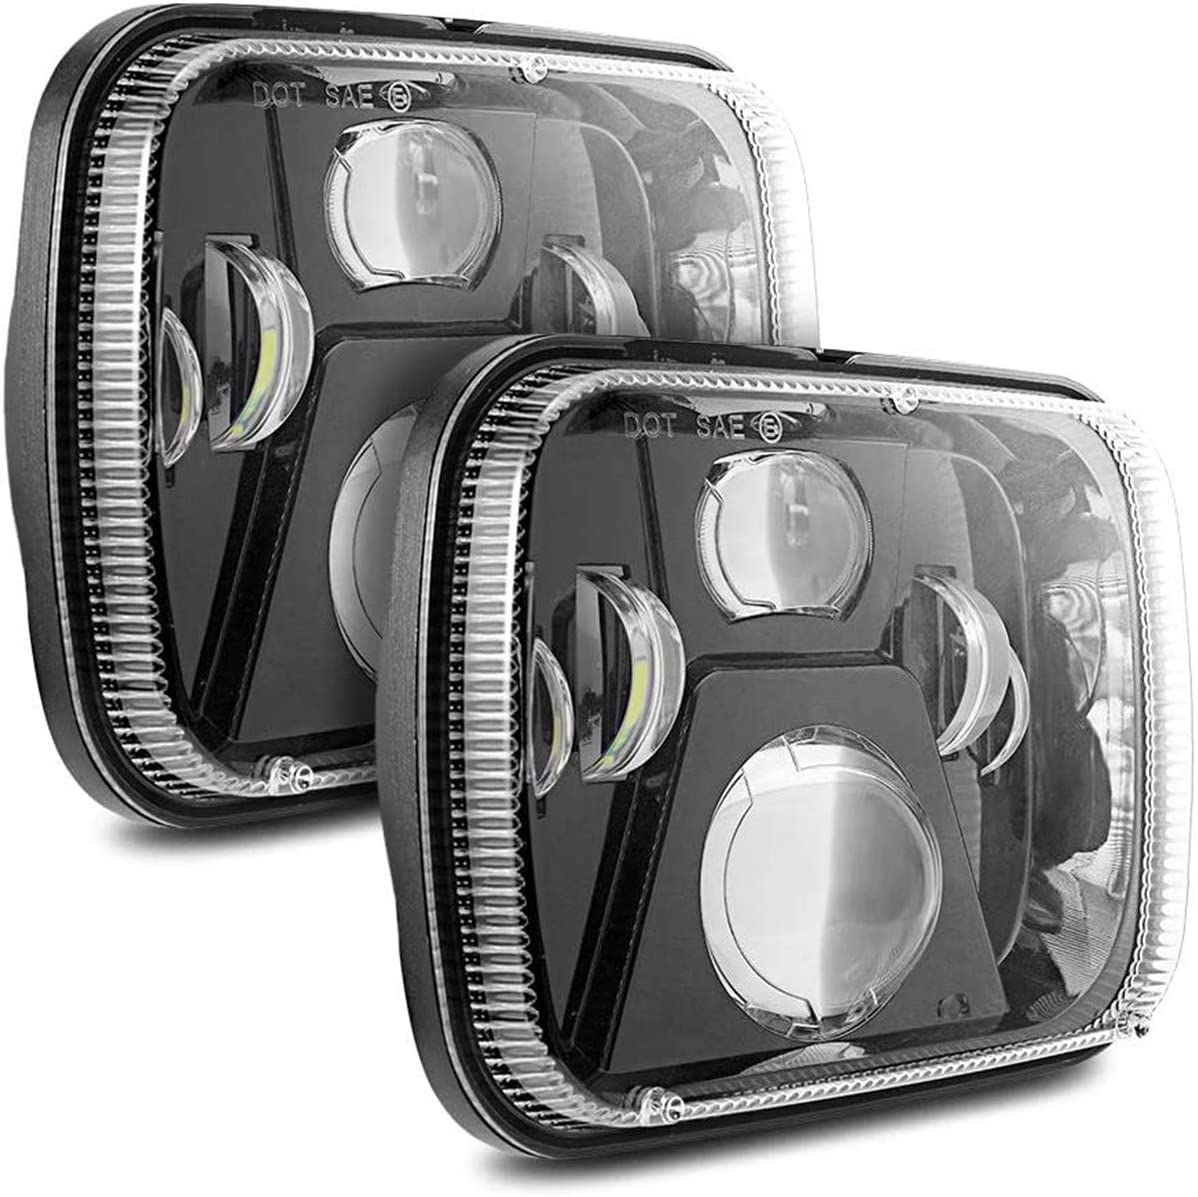 Replacement 5x7 7x6 Inch Led Headlights with High Low Beam for Jeep Wrangler YJ Cherokee (LNC)